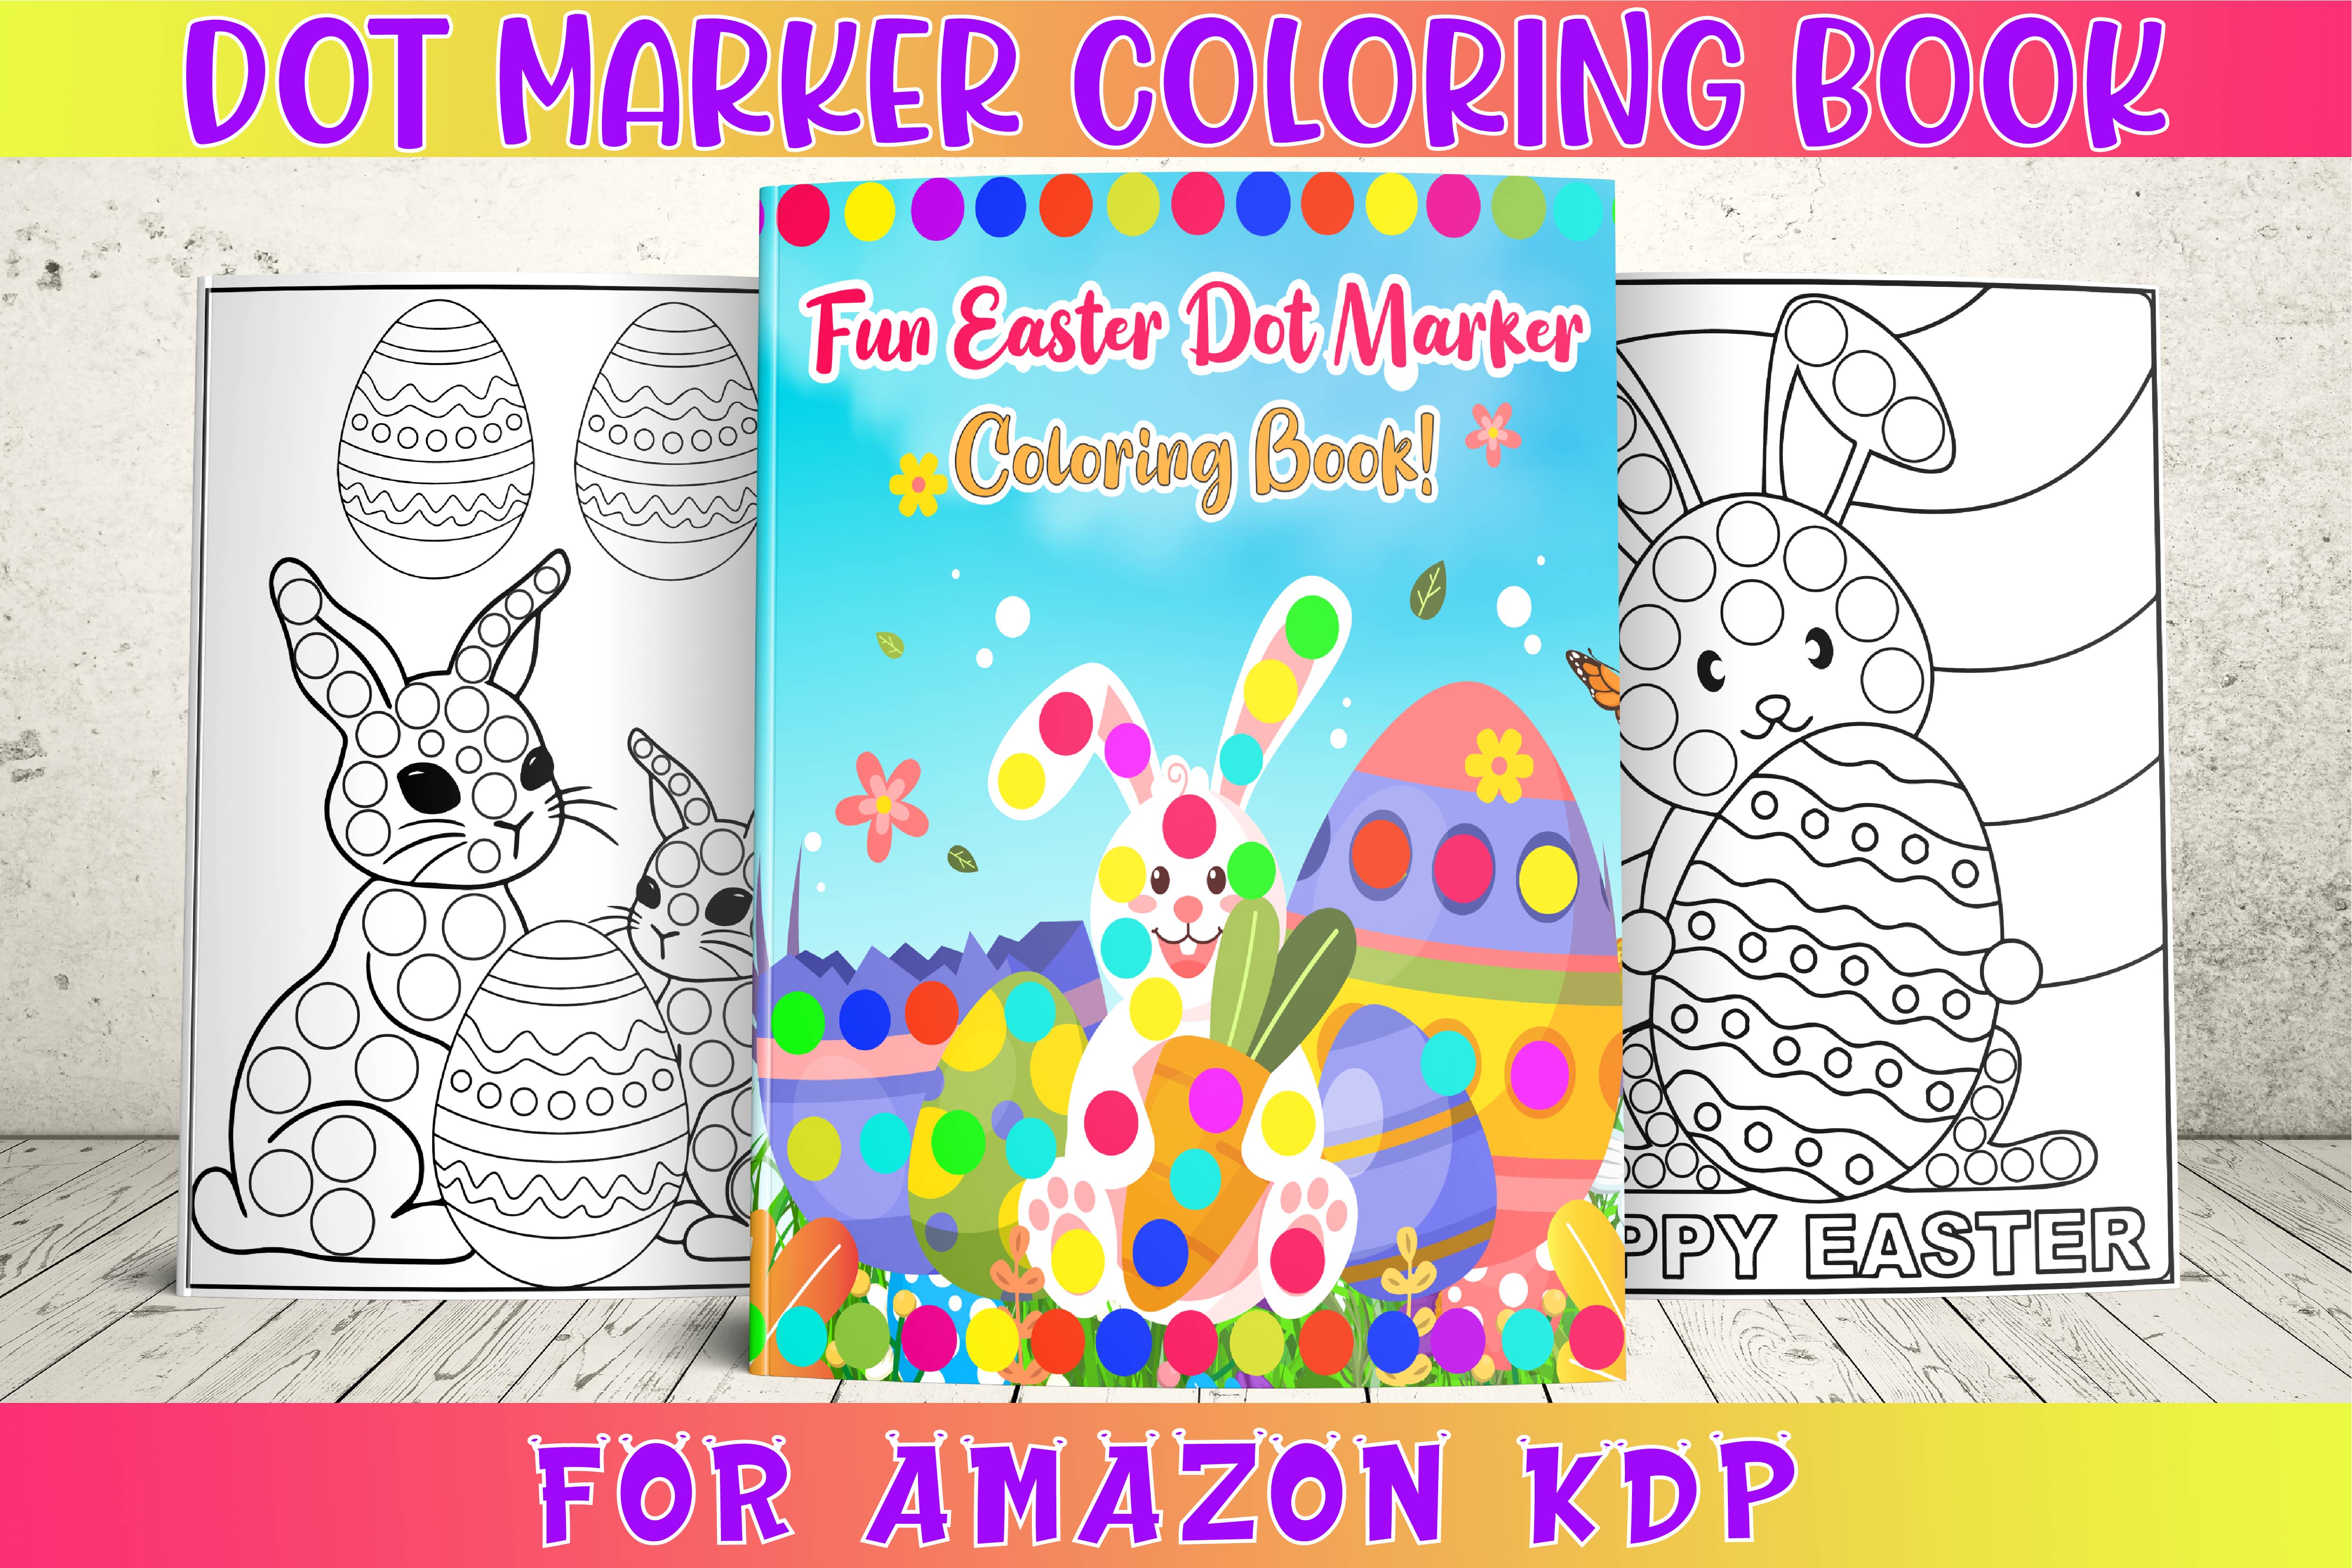 Design dot marker, scissor skills coloring book cover and pages for   kdp by Arafat_71